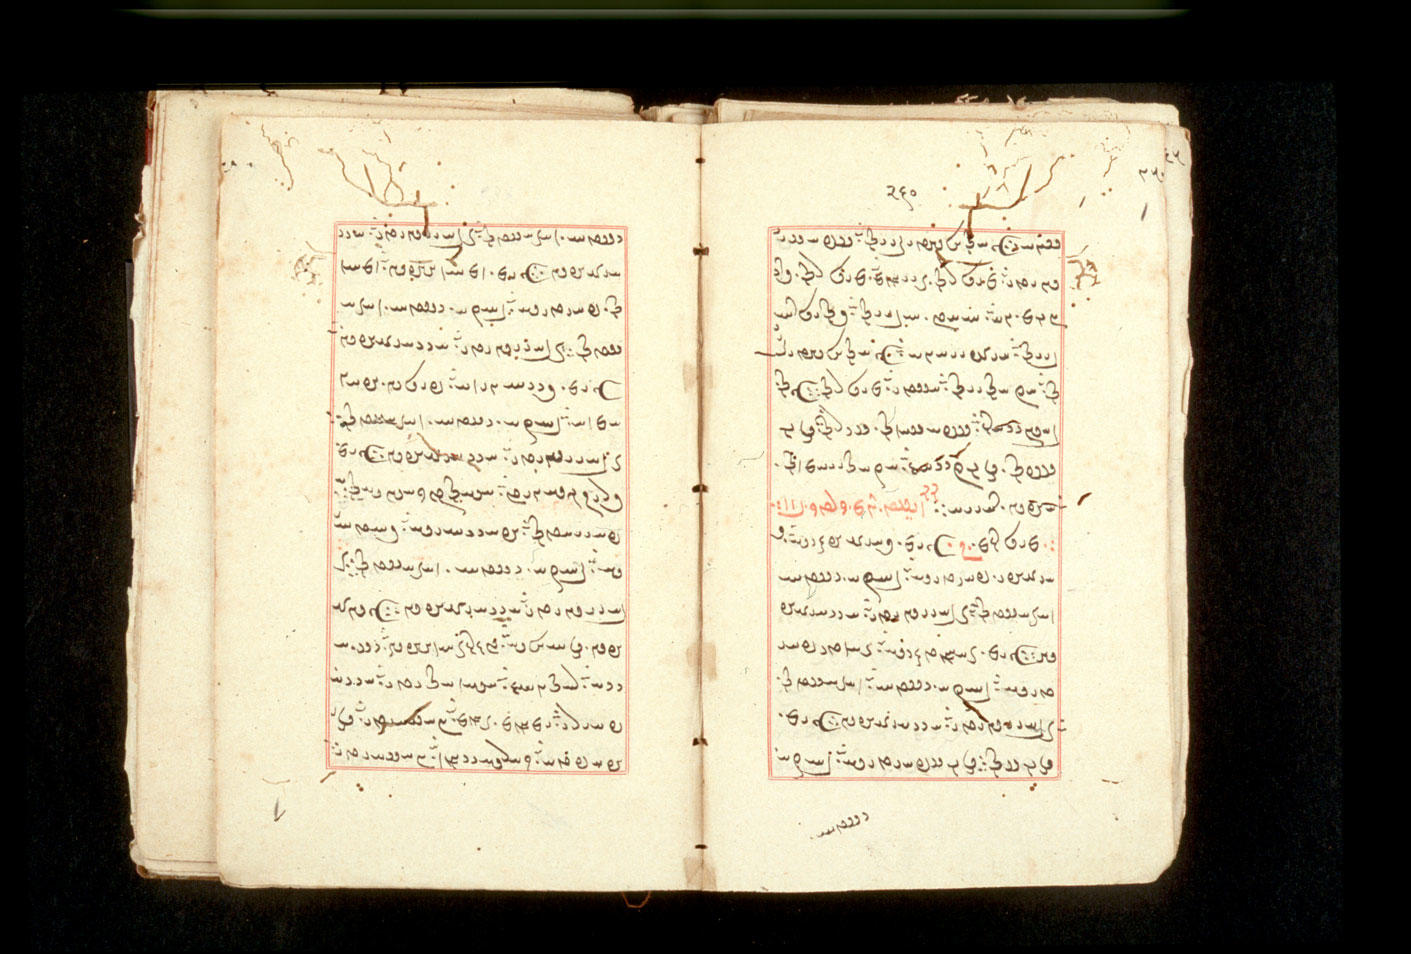 Folios 260v (right) and 261r (left)